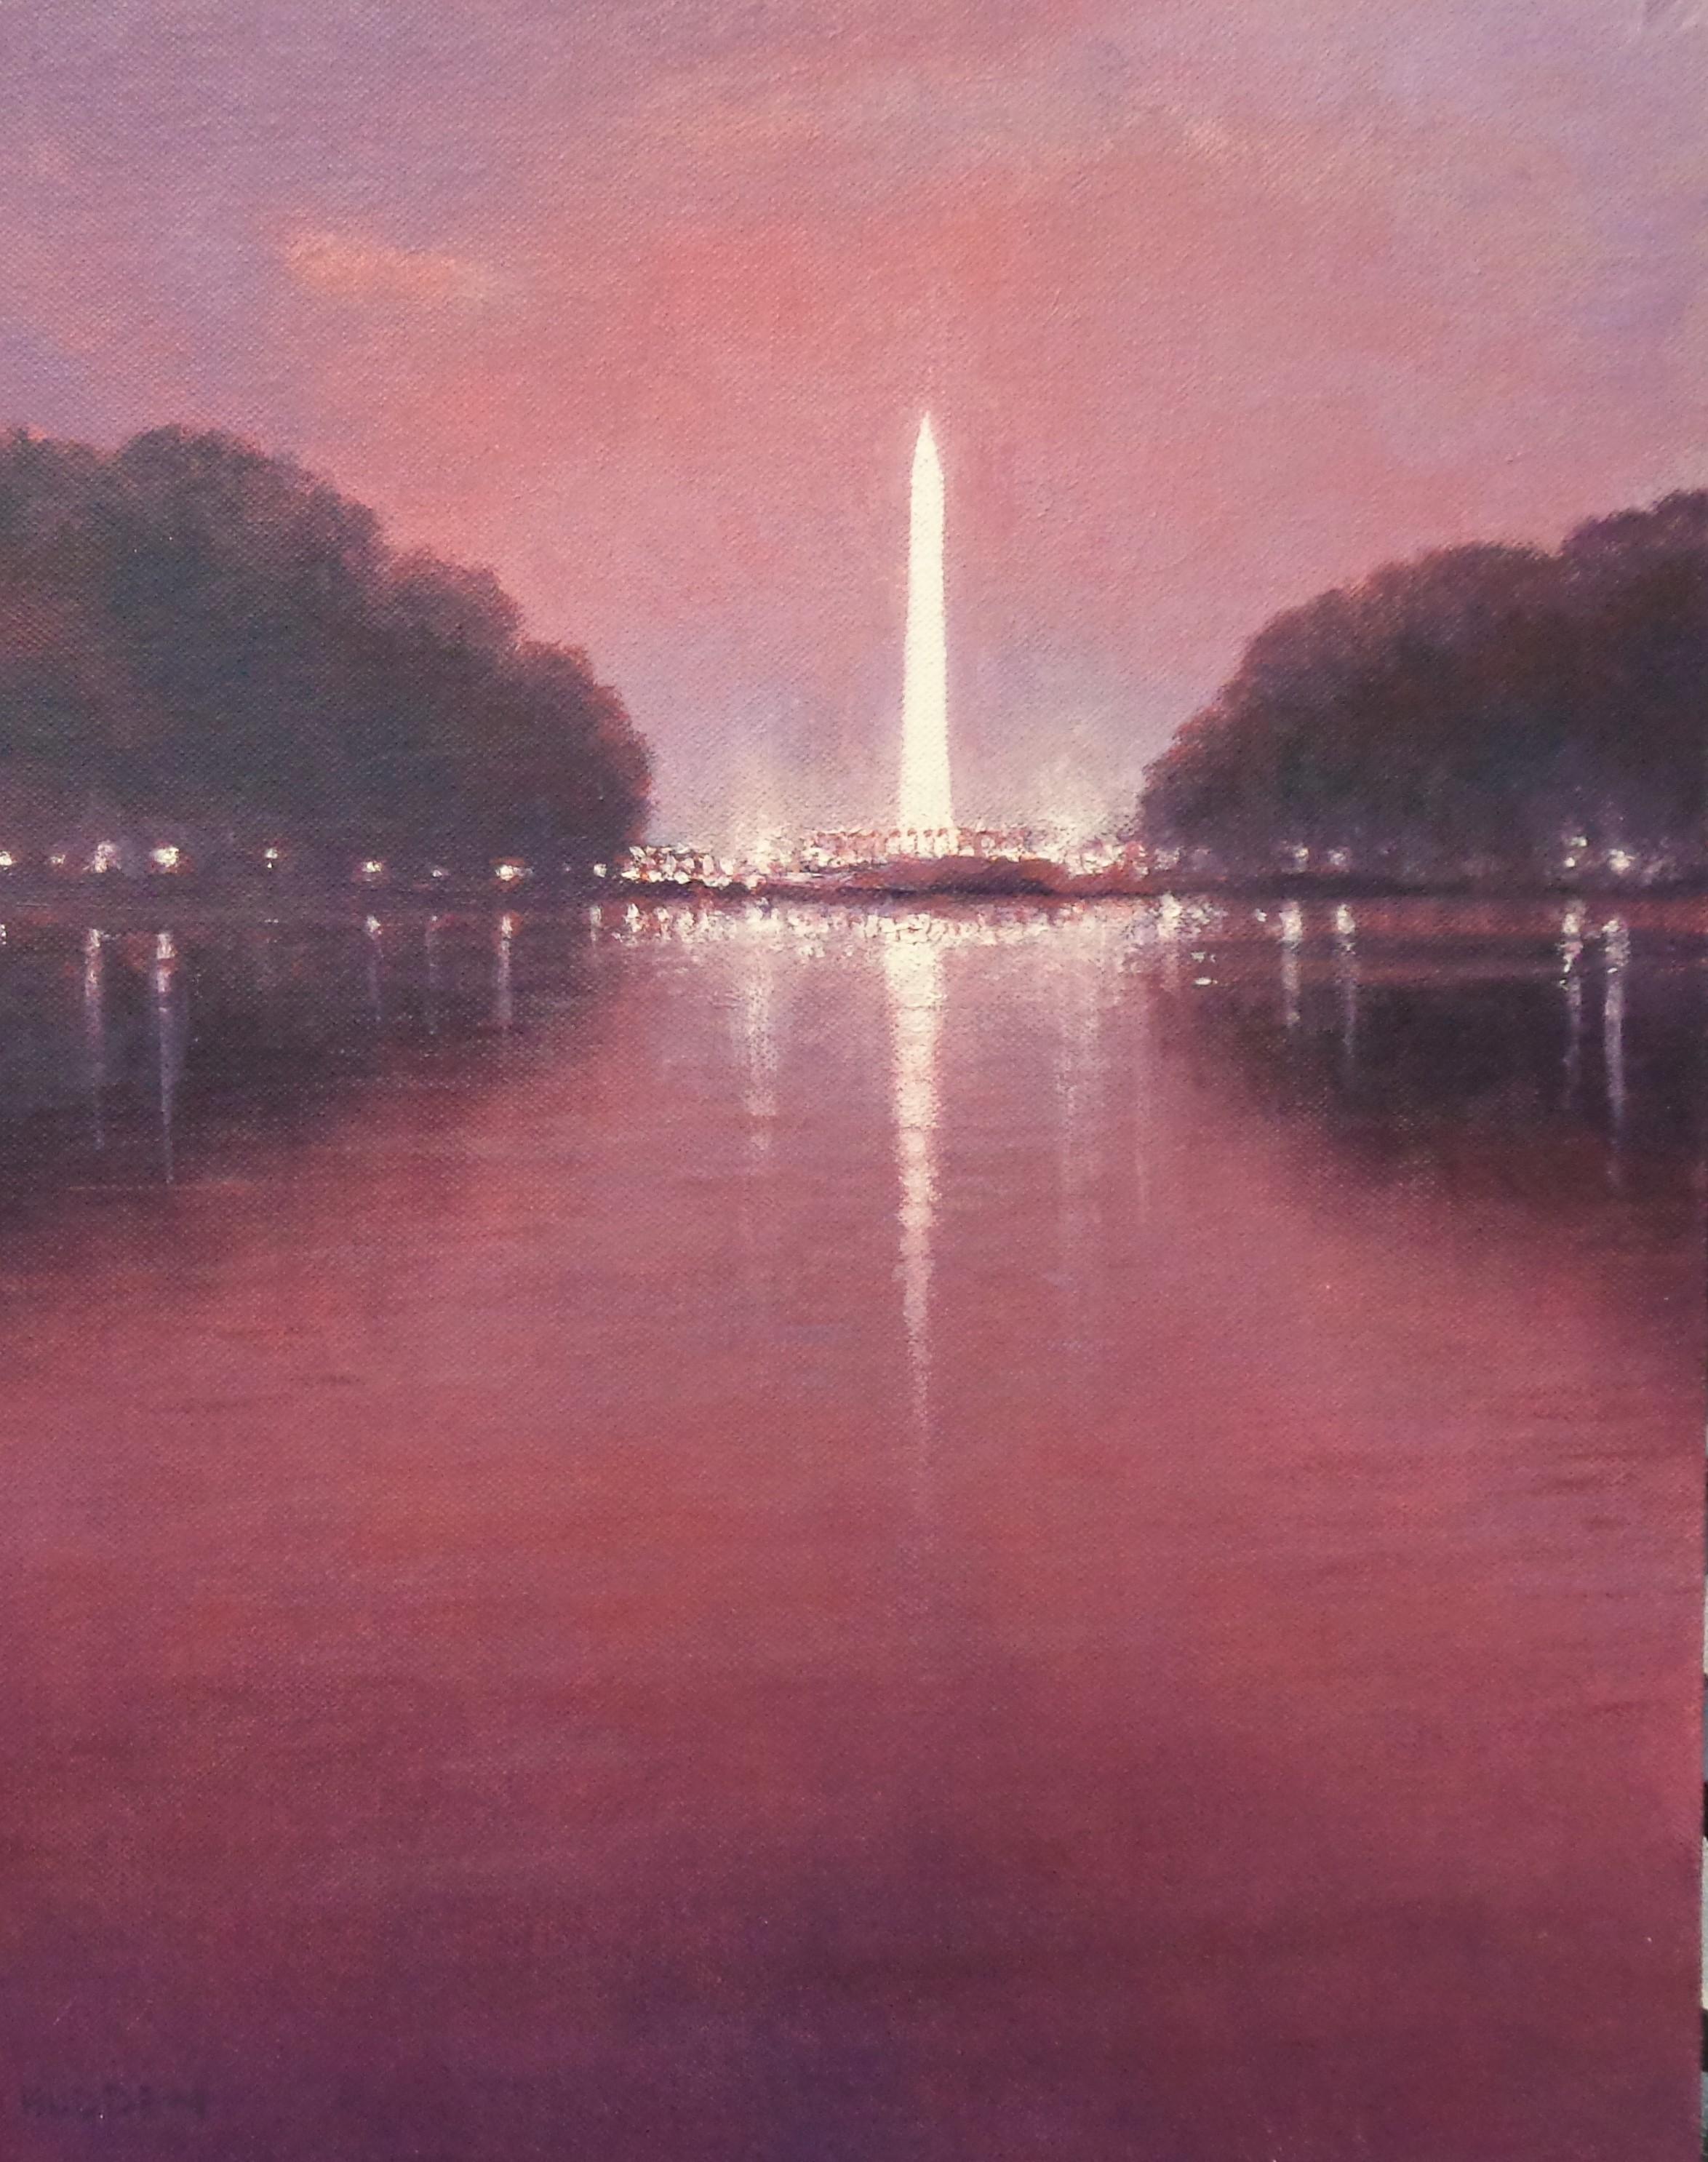 Dressed In Garnett Washington Monument  is an oil painting on canvas panel by award winning contemporary artist Michael Budden that showcases a country house in moonlight The image is 14 x 11 and 20.75 x 17.75 x 1 framed.  The coloration overall is